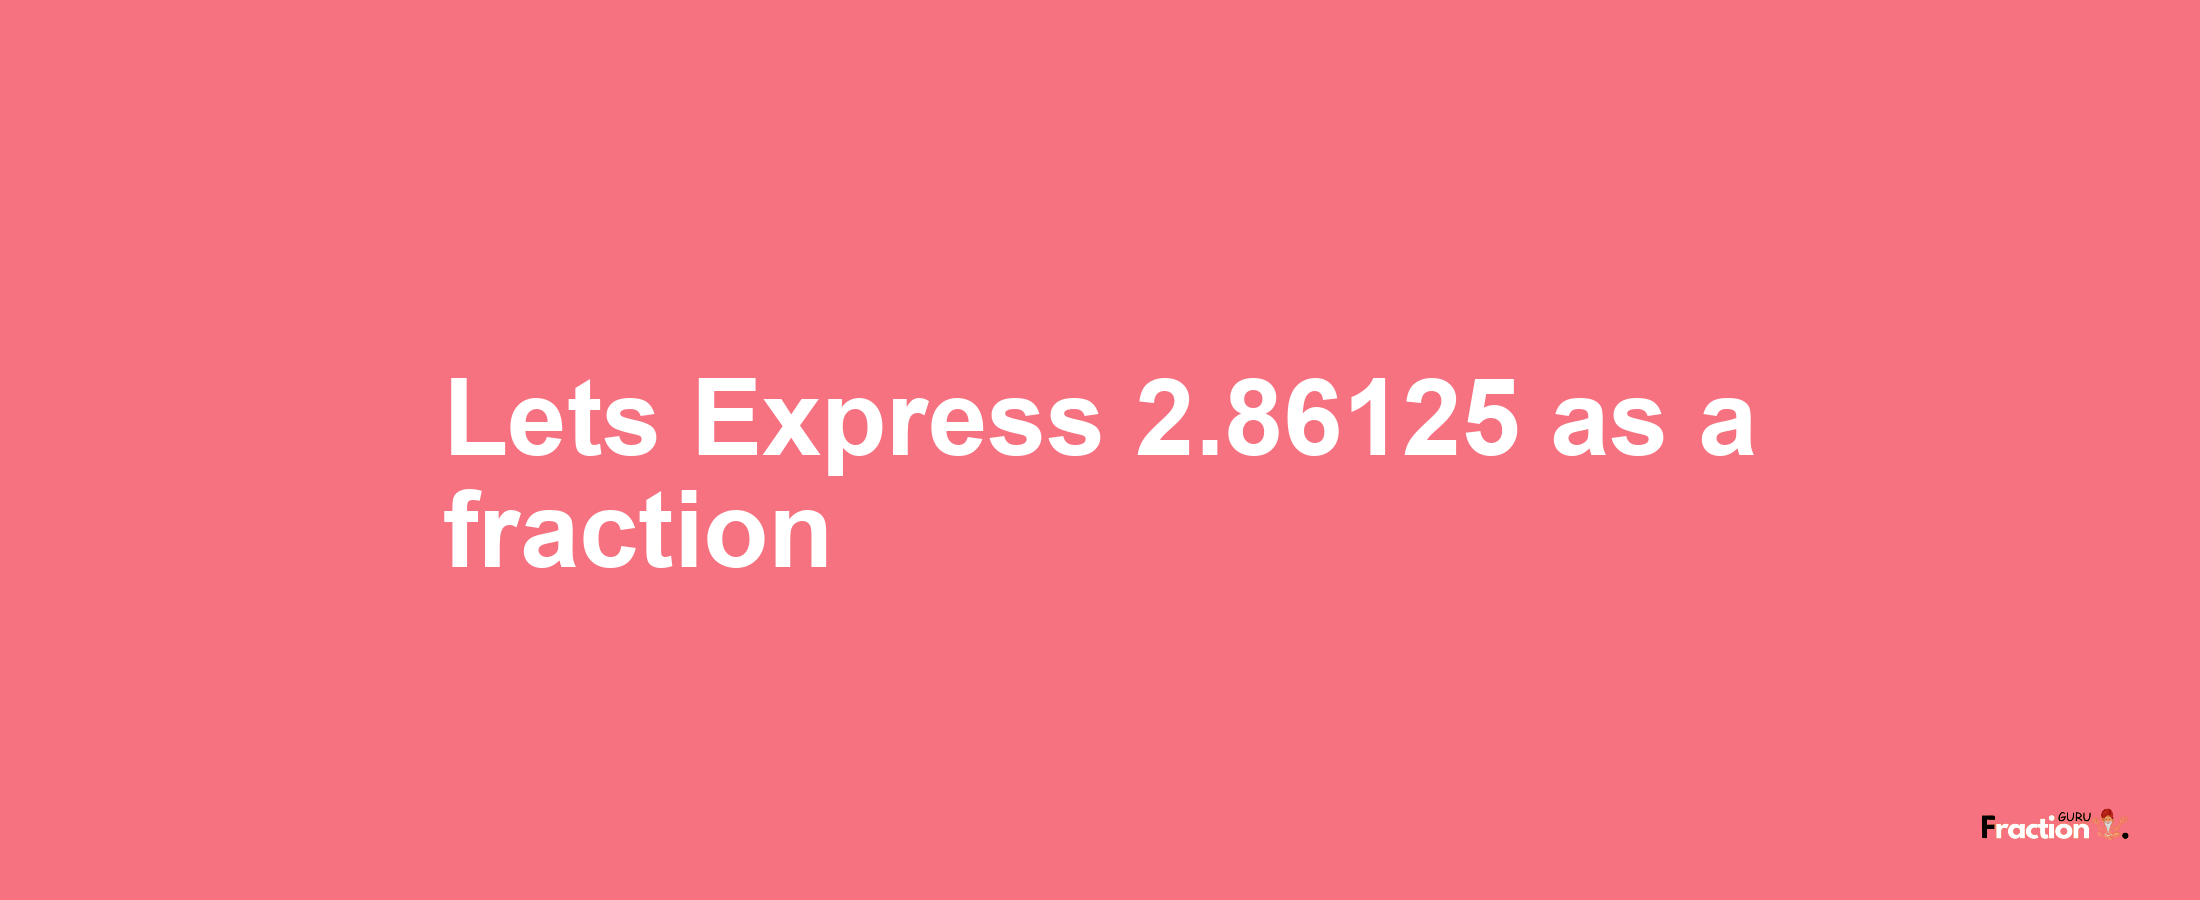 Lets Express 2.86125 as afraction